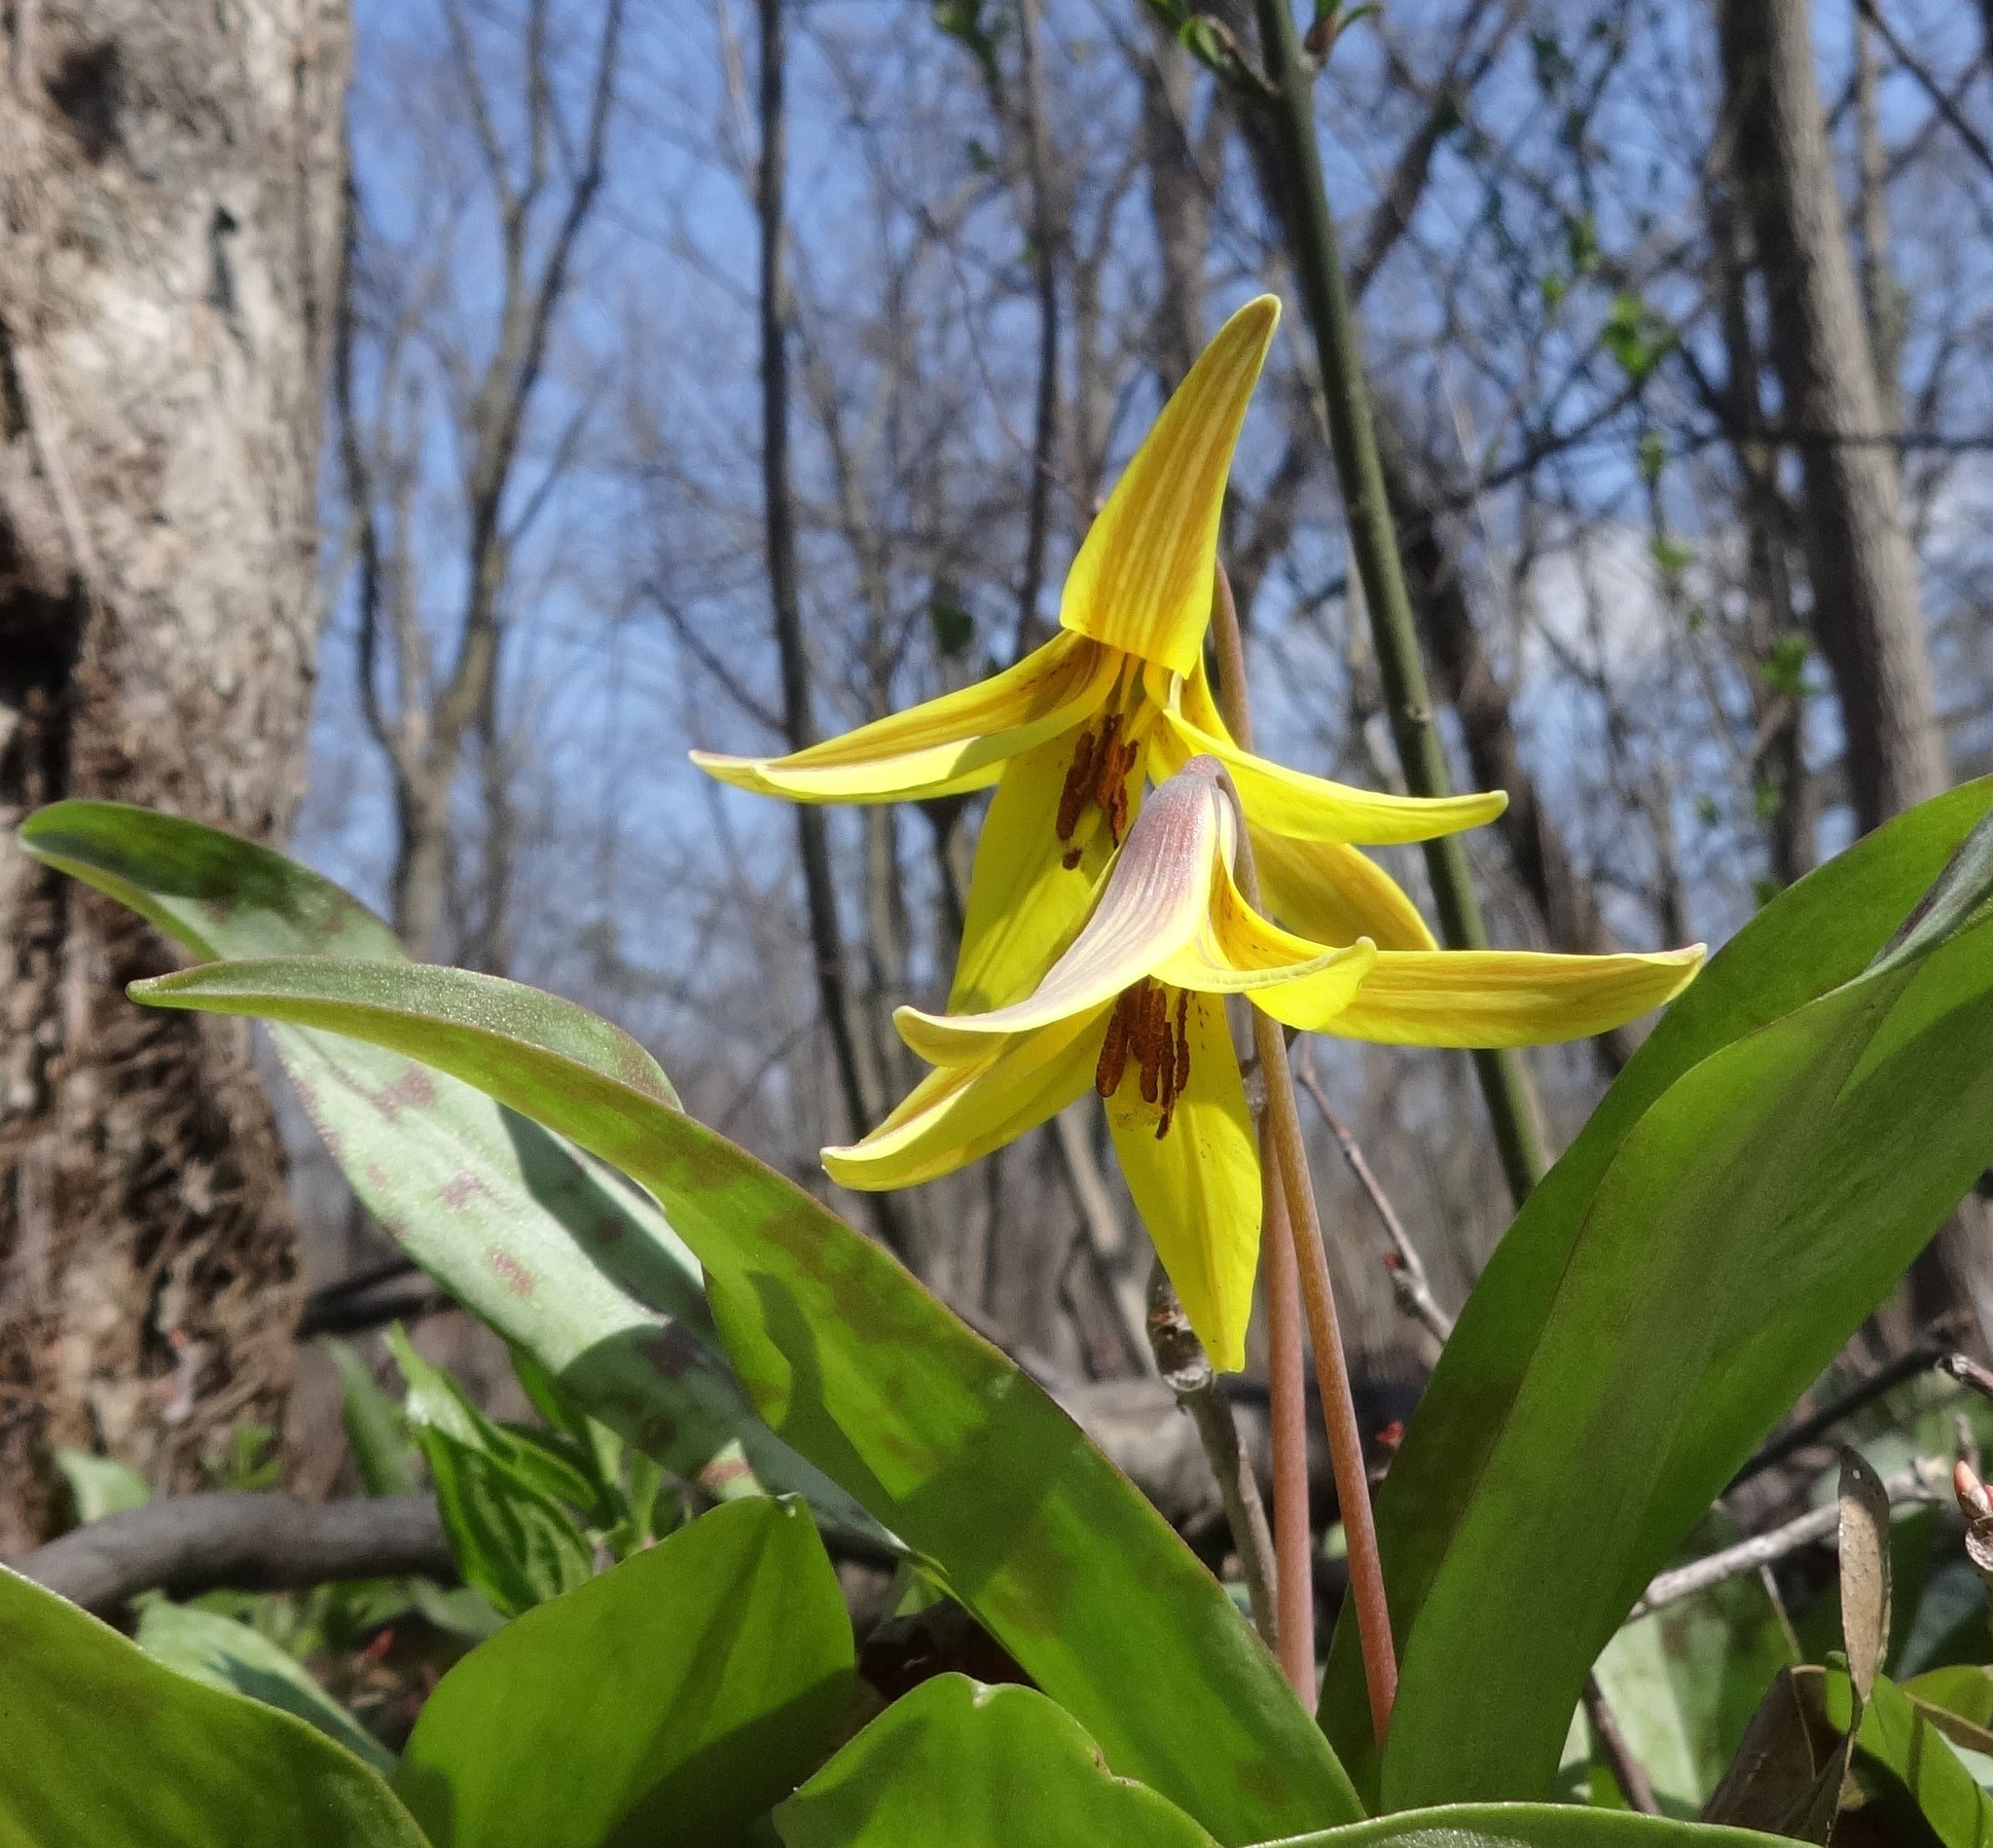 Sony Cyber-shot DSC-WX80 sample photo. Trout lilly 2018 photography